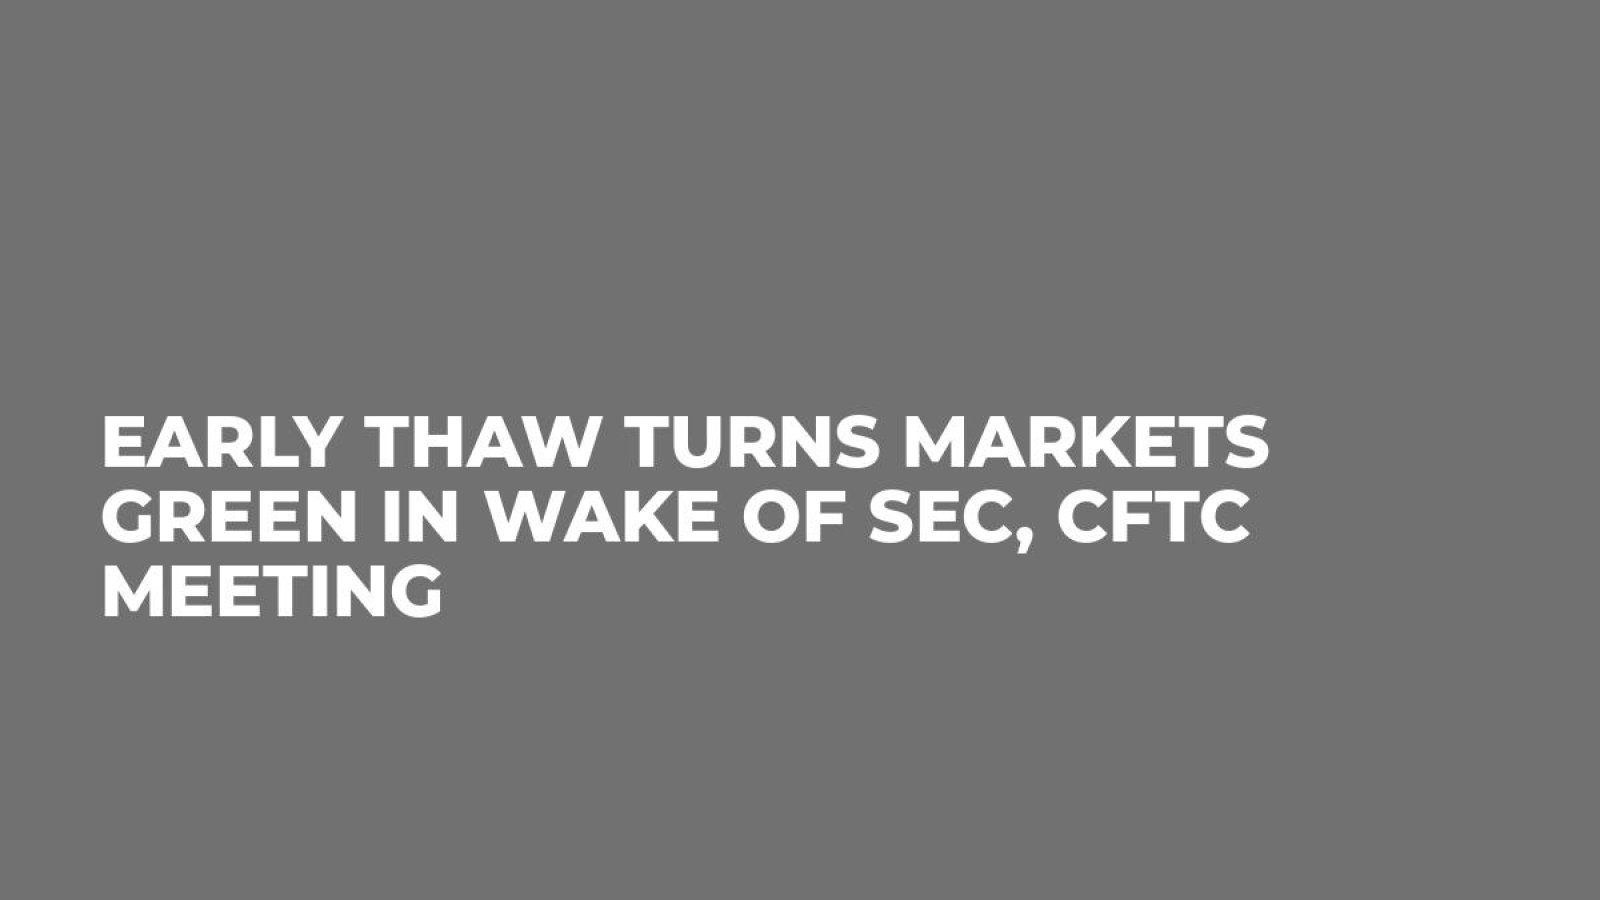 Early Thaw Turns Markets Green in Wake of SEC, CFTC Meeting